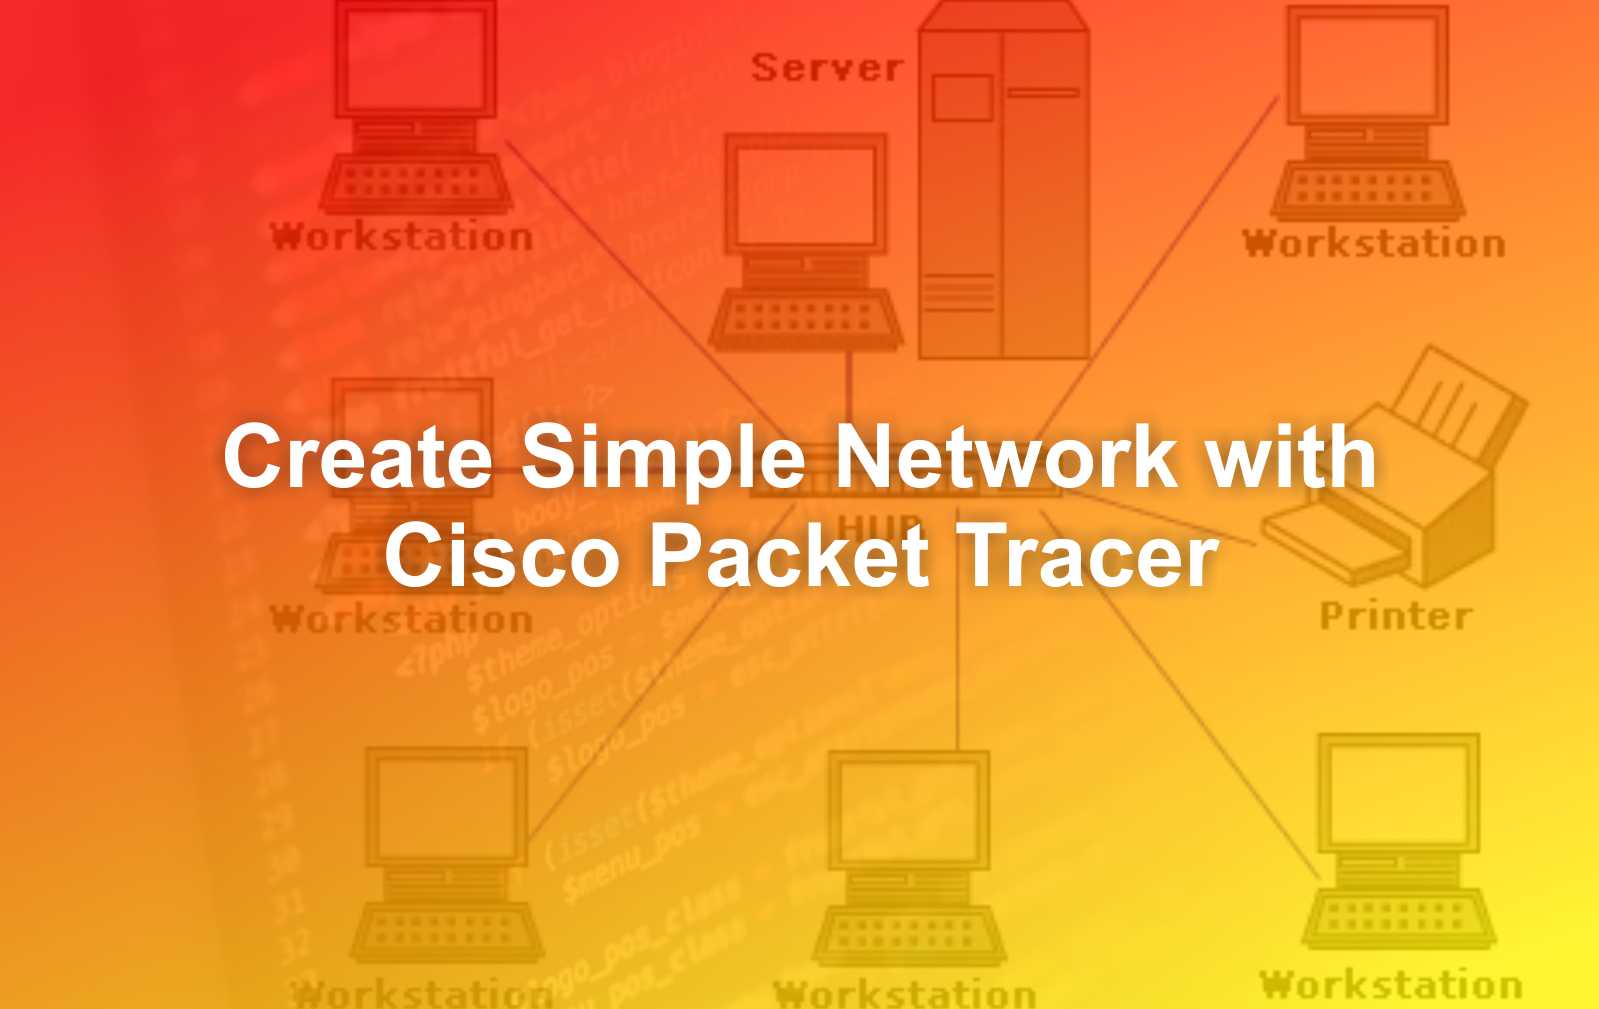 Create Simple Network with Cisco Packet Tracer